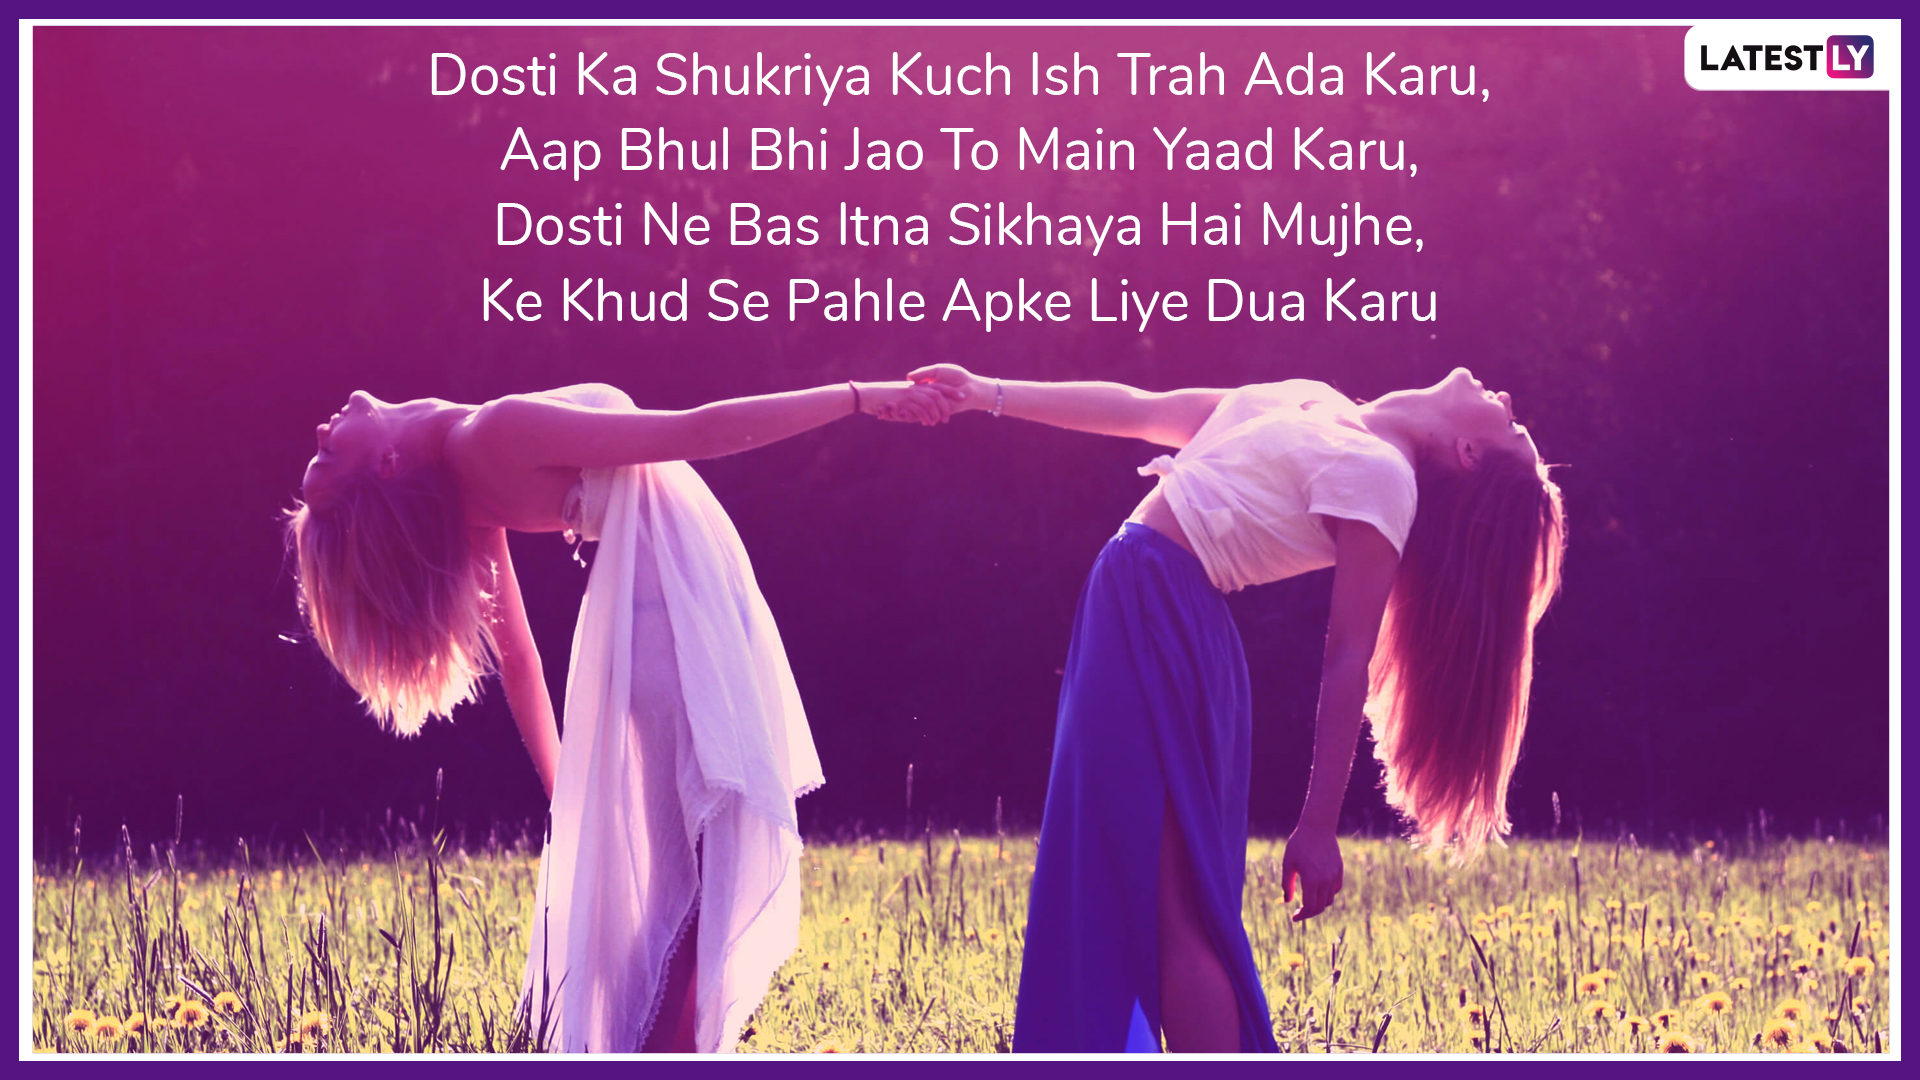 happy friendship day poems in hindi